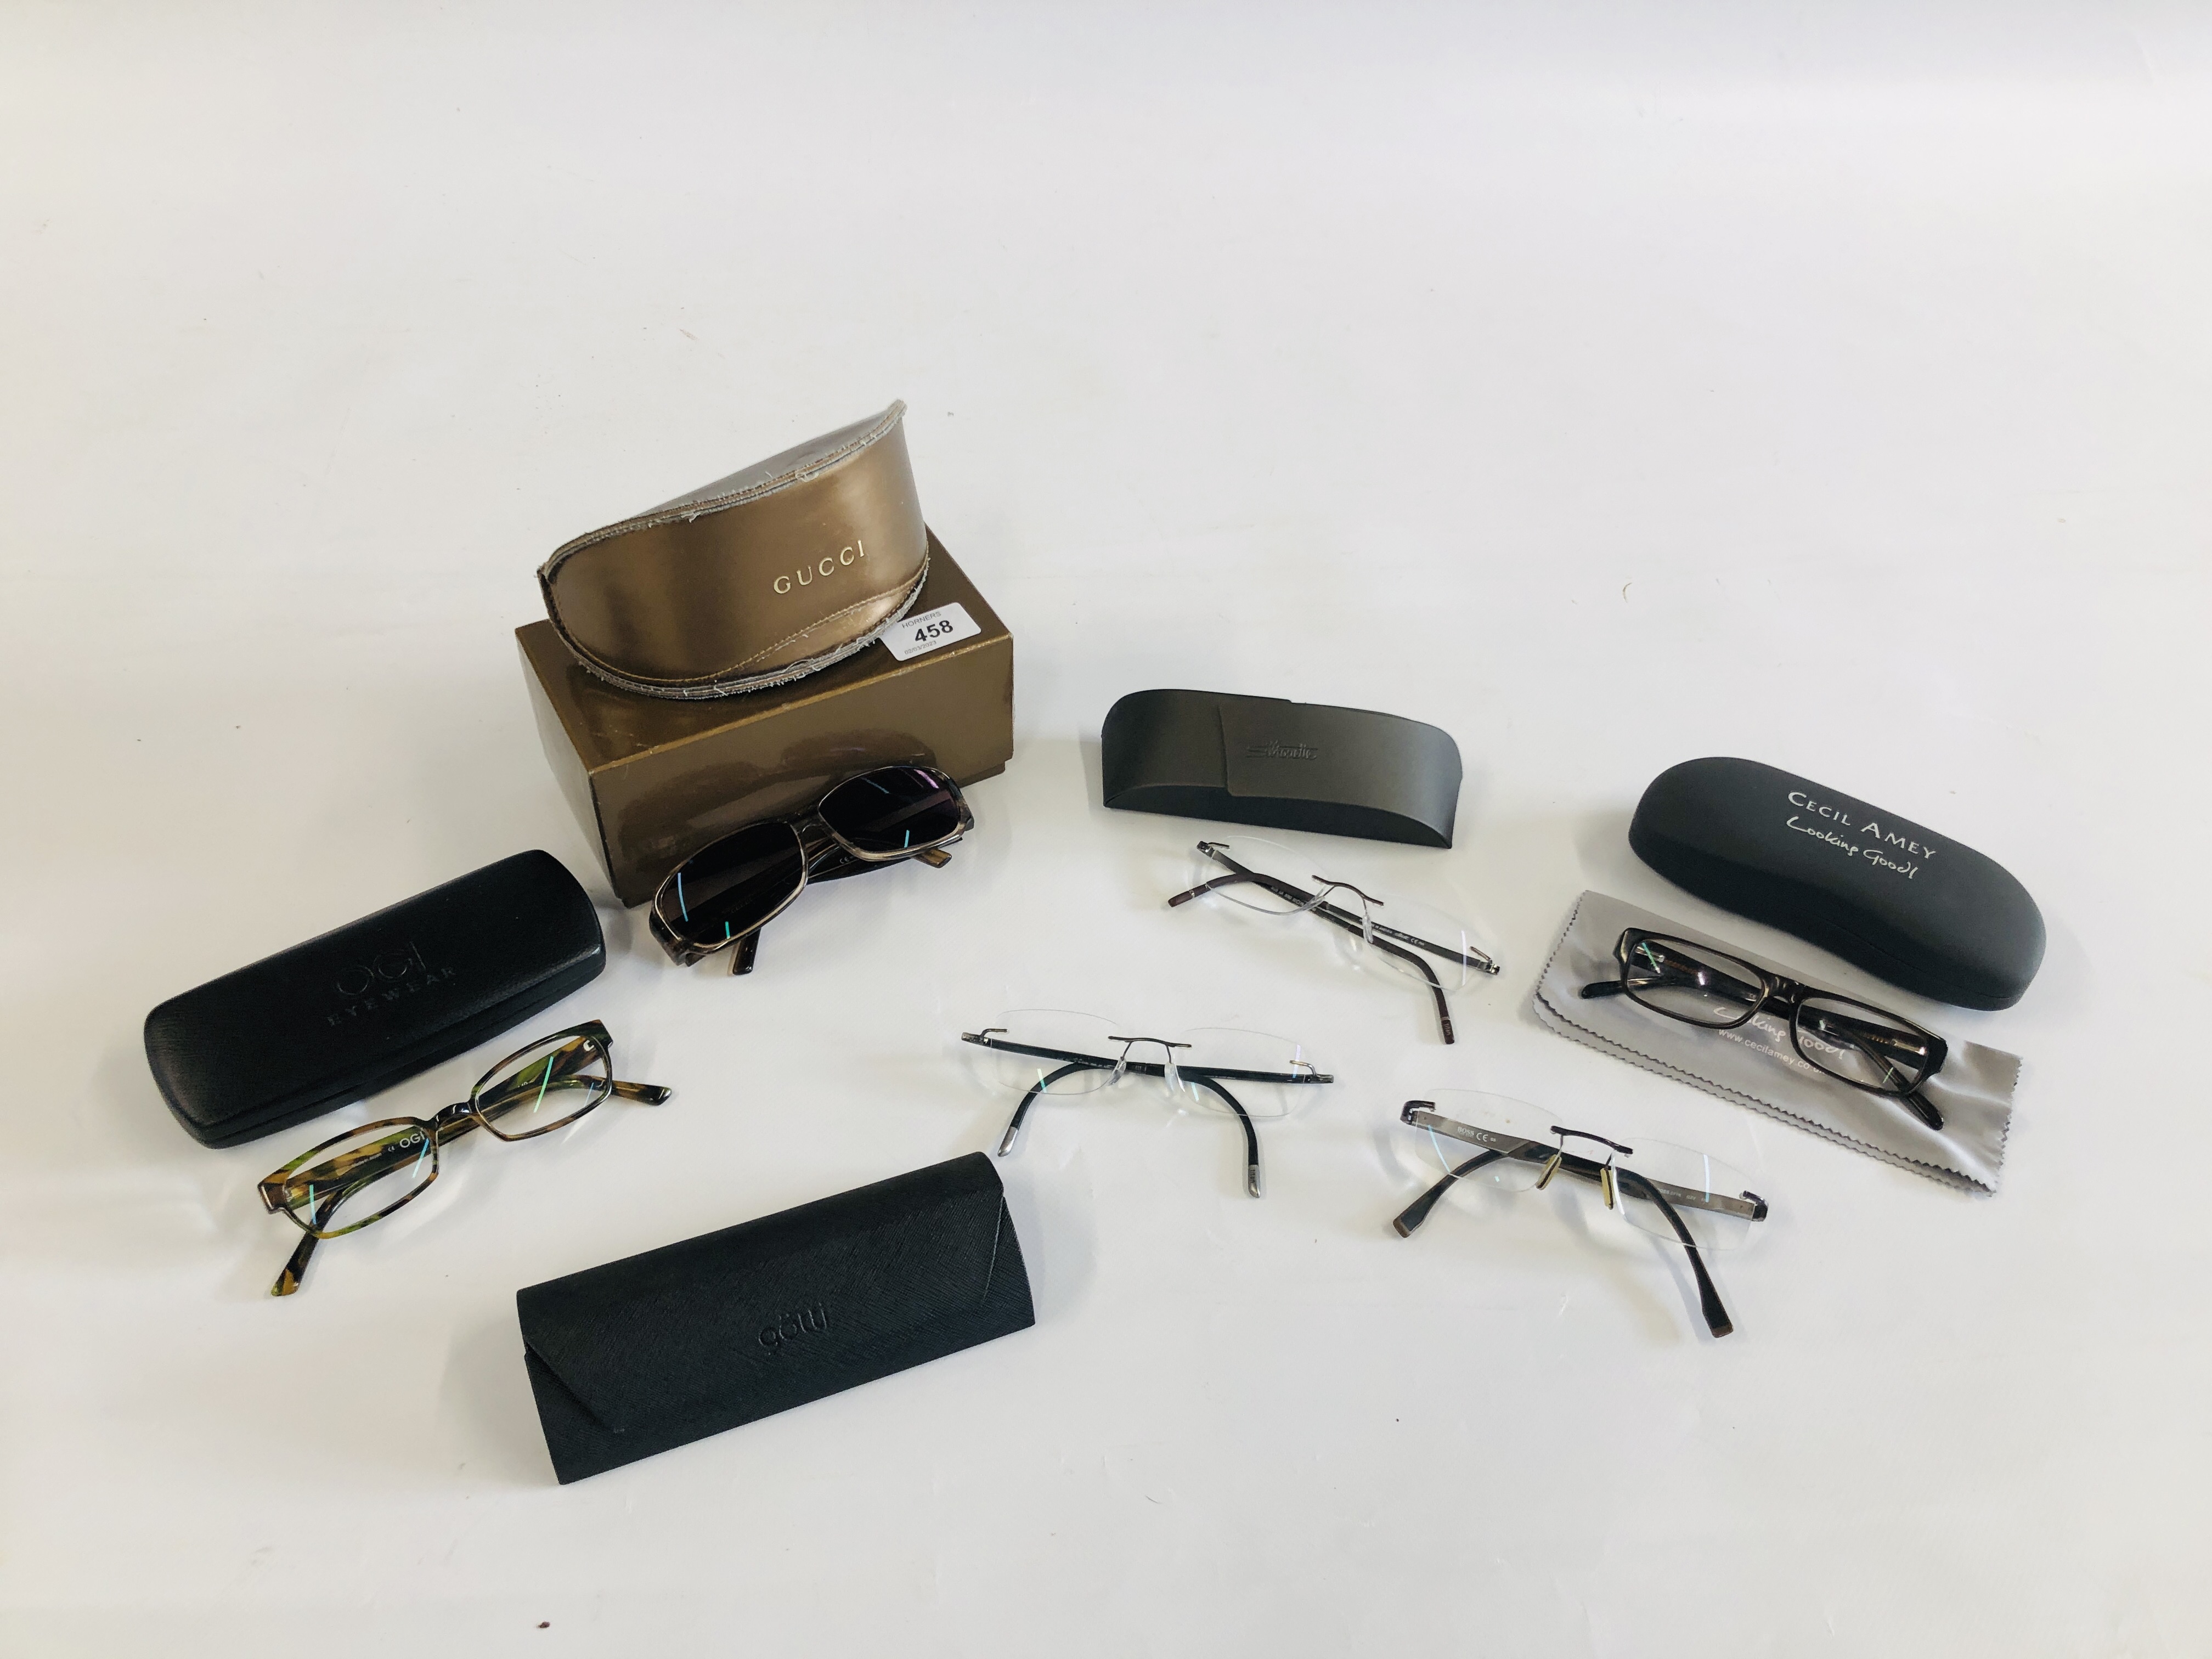 6 PAIRS OF DESIGNER FRAMED PRESCRIPTION READING GLASSES TO INCLUDE GUCCI, HUGO BOSS, SILHOUETTE.